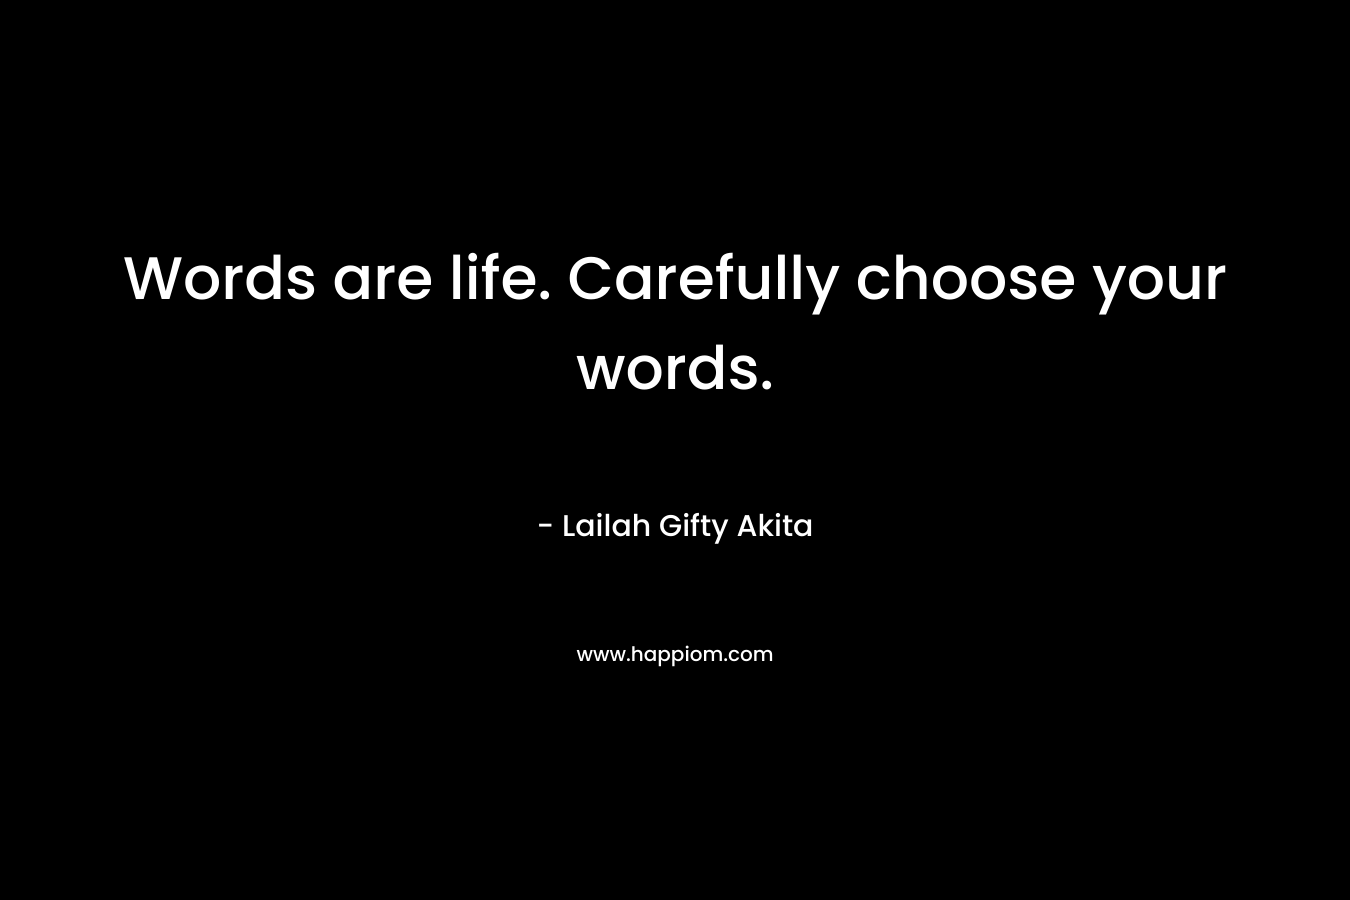 Words are life. Carefully choose your words.